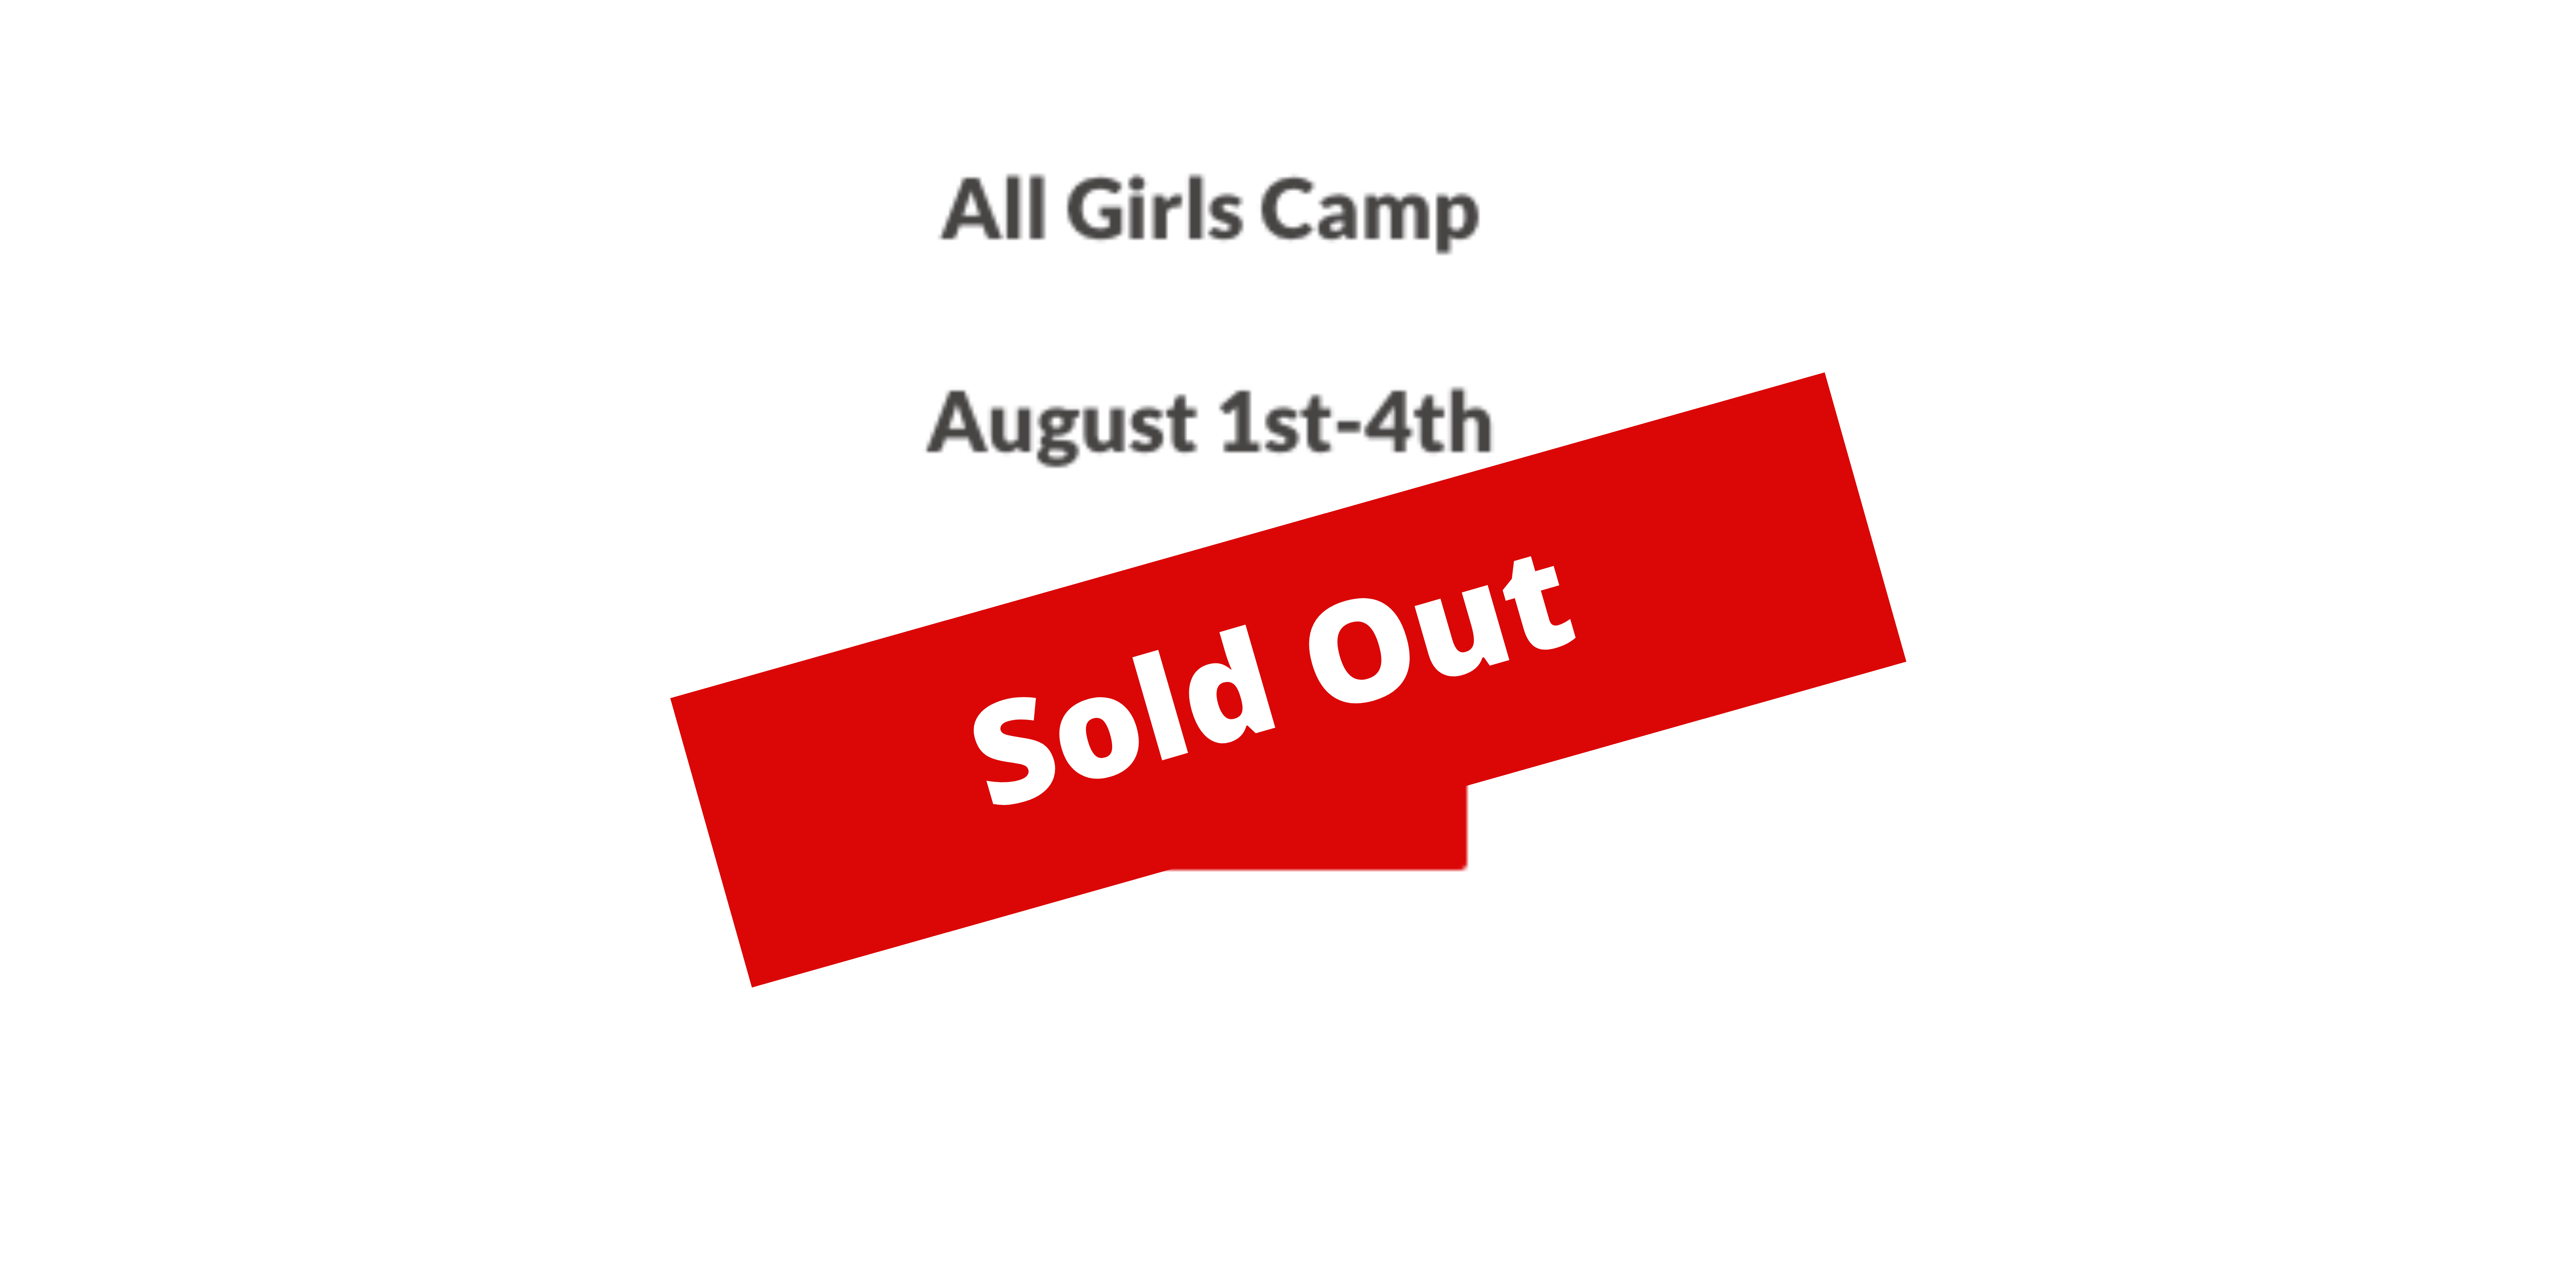 all girls camp - sold out